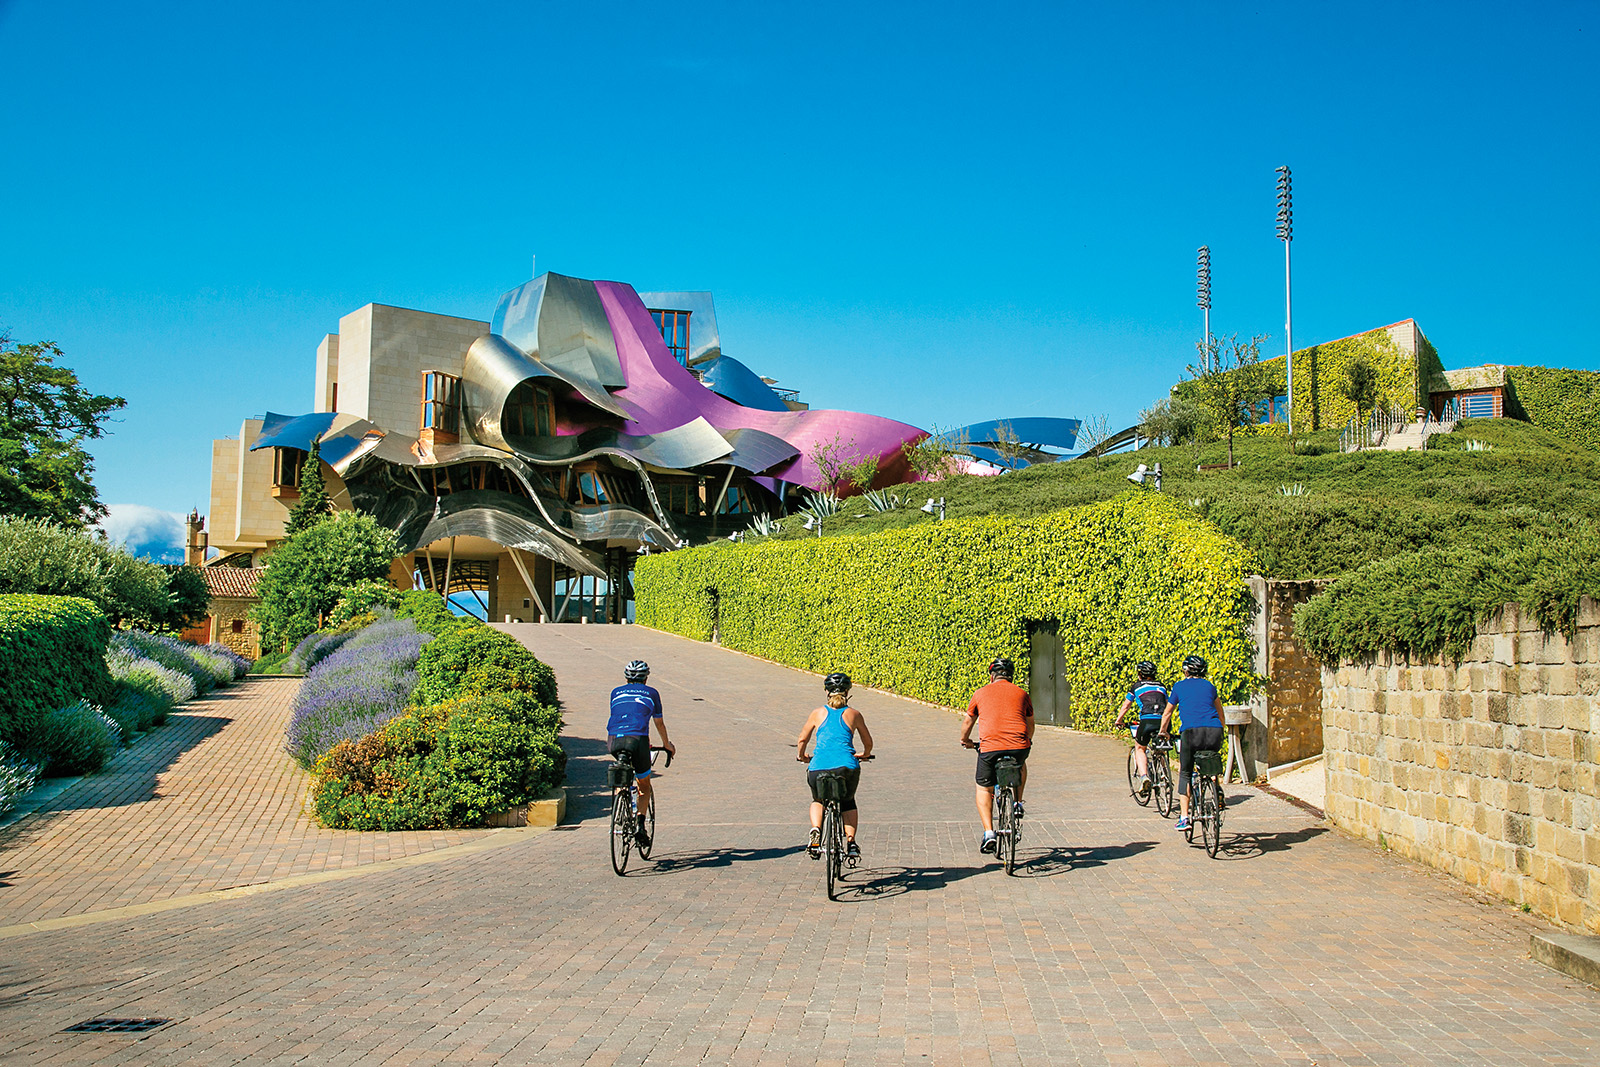 Group of travelers biking up to a colorful building